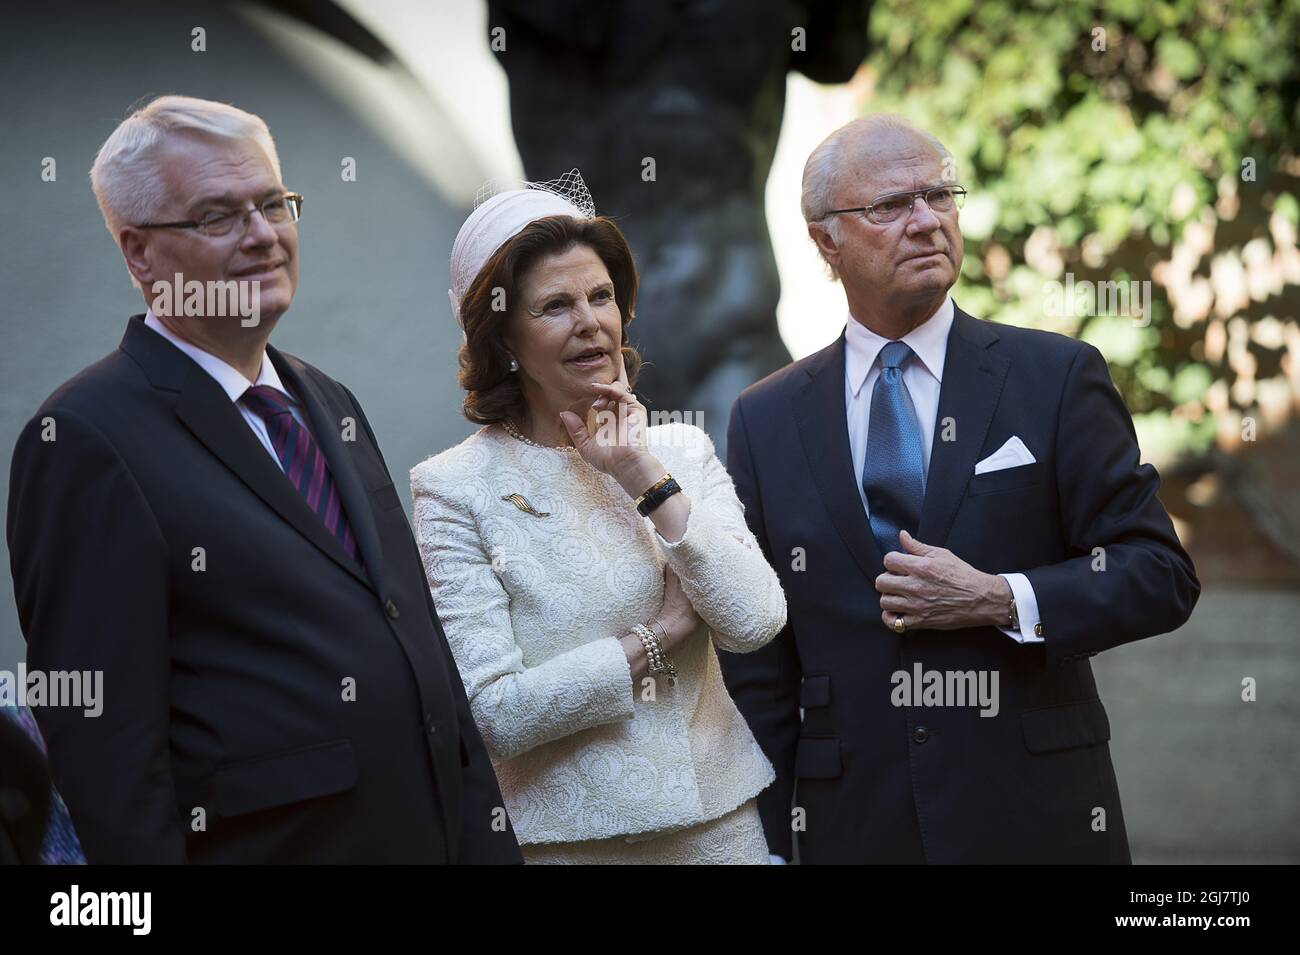 Croatia's President Ivo Josipovic , Swedish Queen Silvia and King Carl Gustaf a the Mestrovic museum in Zagreb, Croatia on April 16, 2013. The Swedish King and Queen are on a three-day official visit to Croatia.   Stock Photo